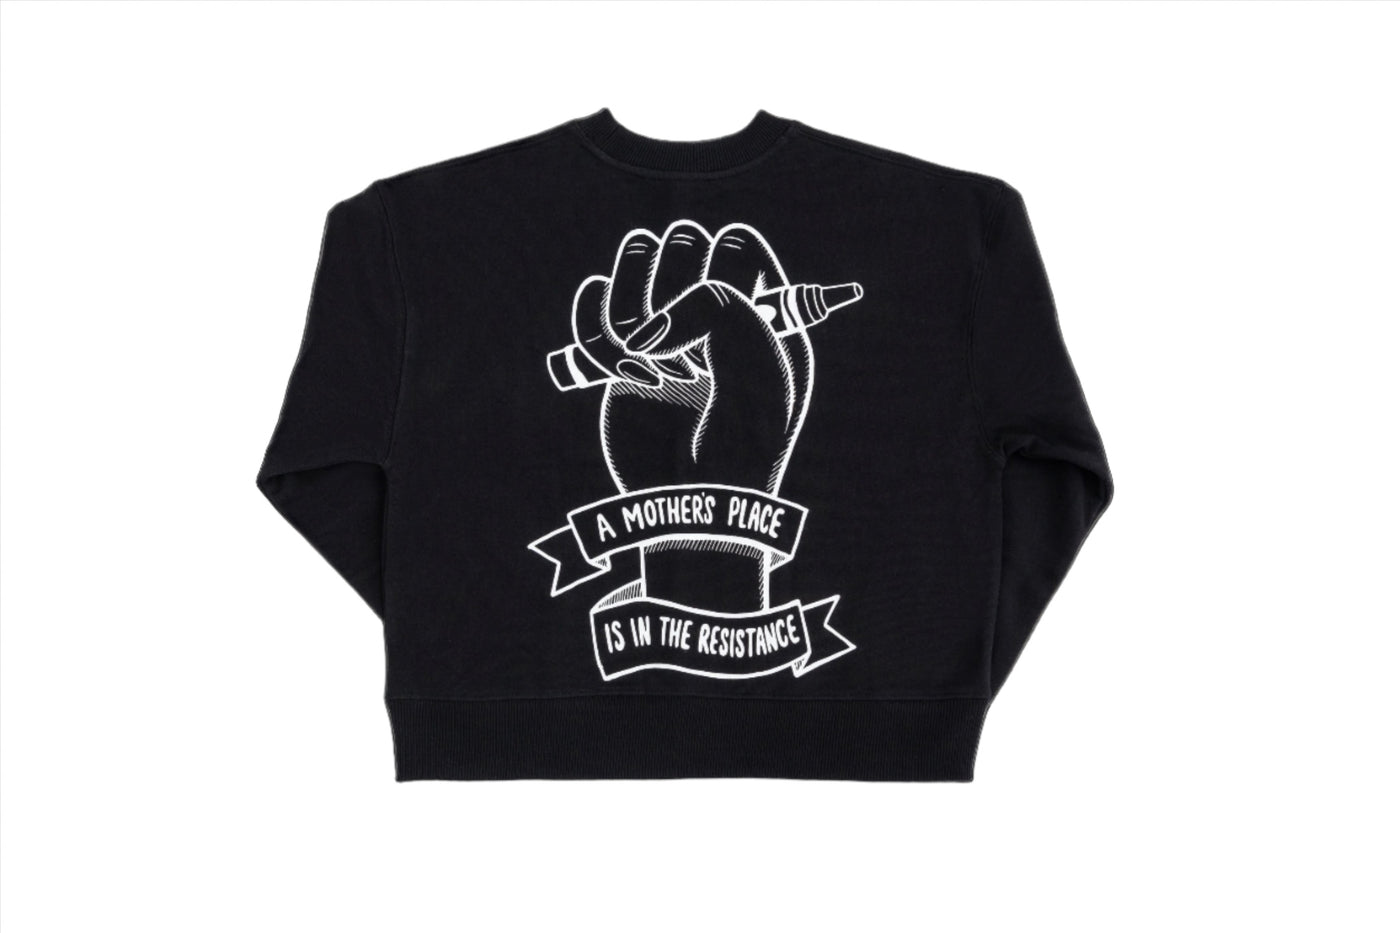 A Mother’s Place Is in the Resistance Black Feminist Sweater Black & Beech